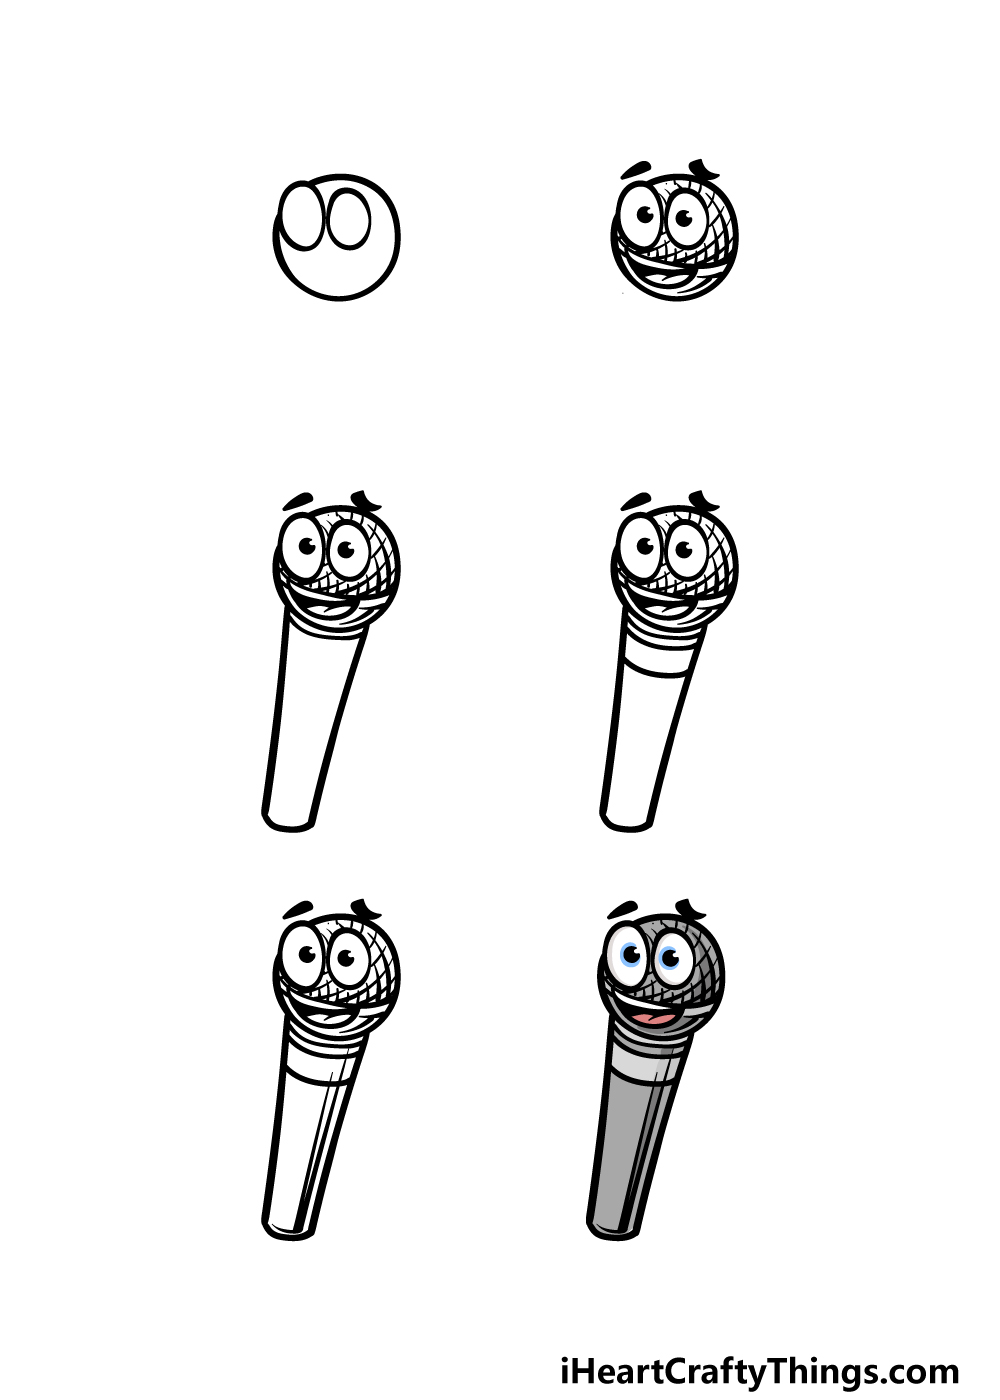 how to draw a cartoon microphone in 6 steps